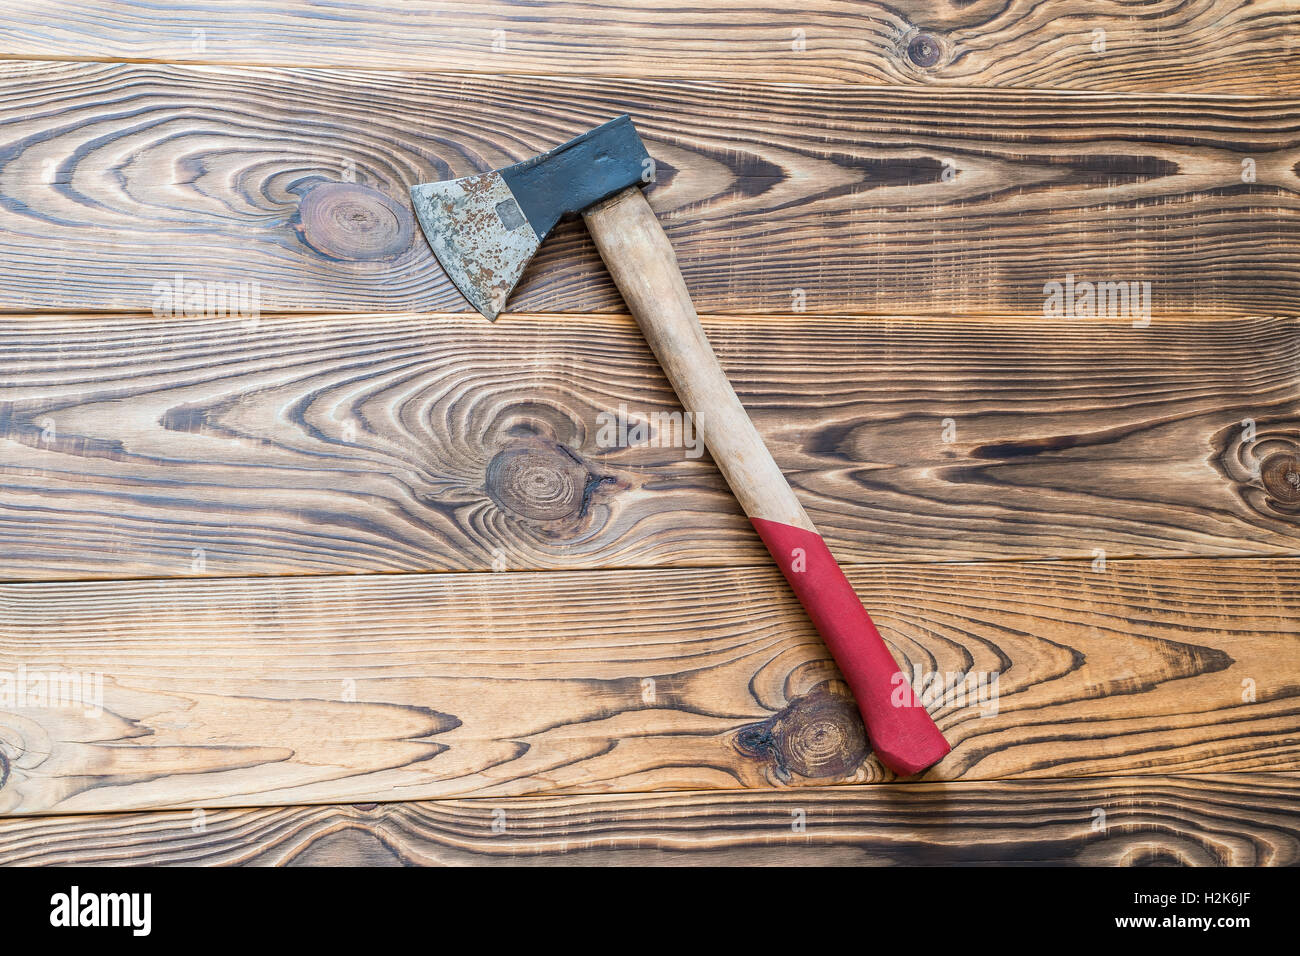 Big rusty ax with long red handle on aged natural wooden background Stock Photo